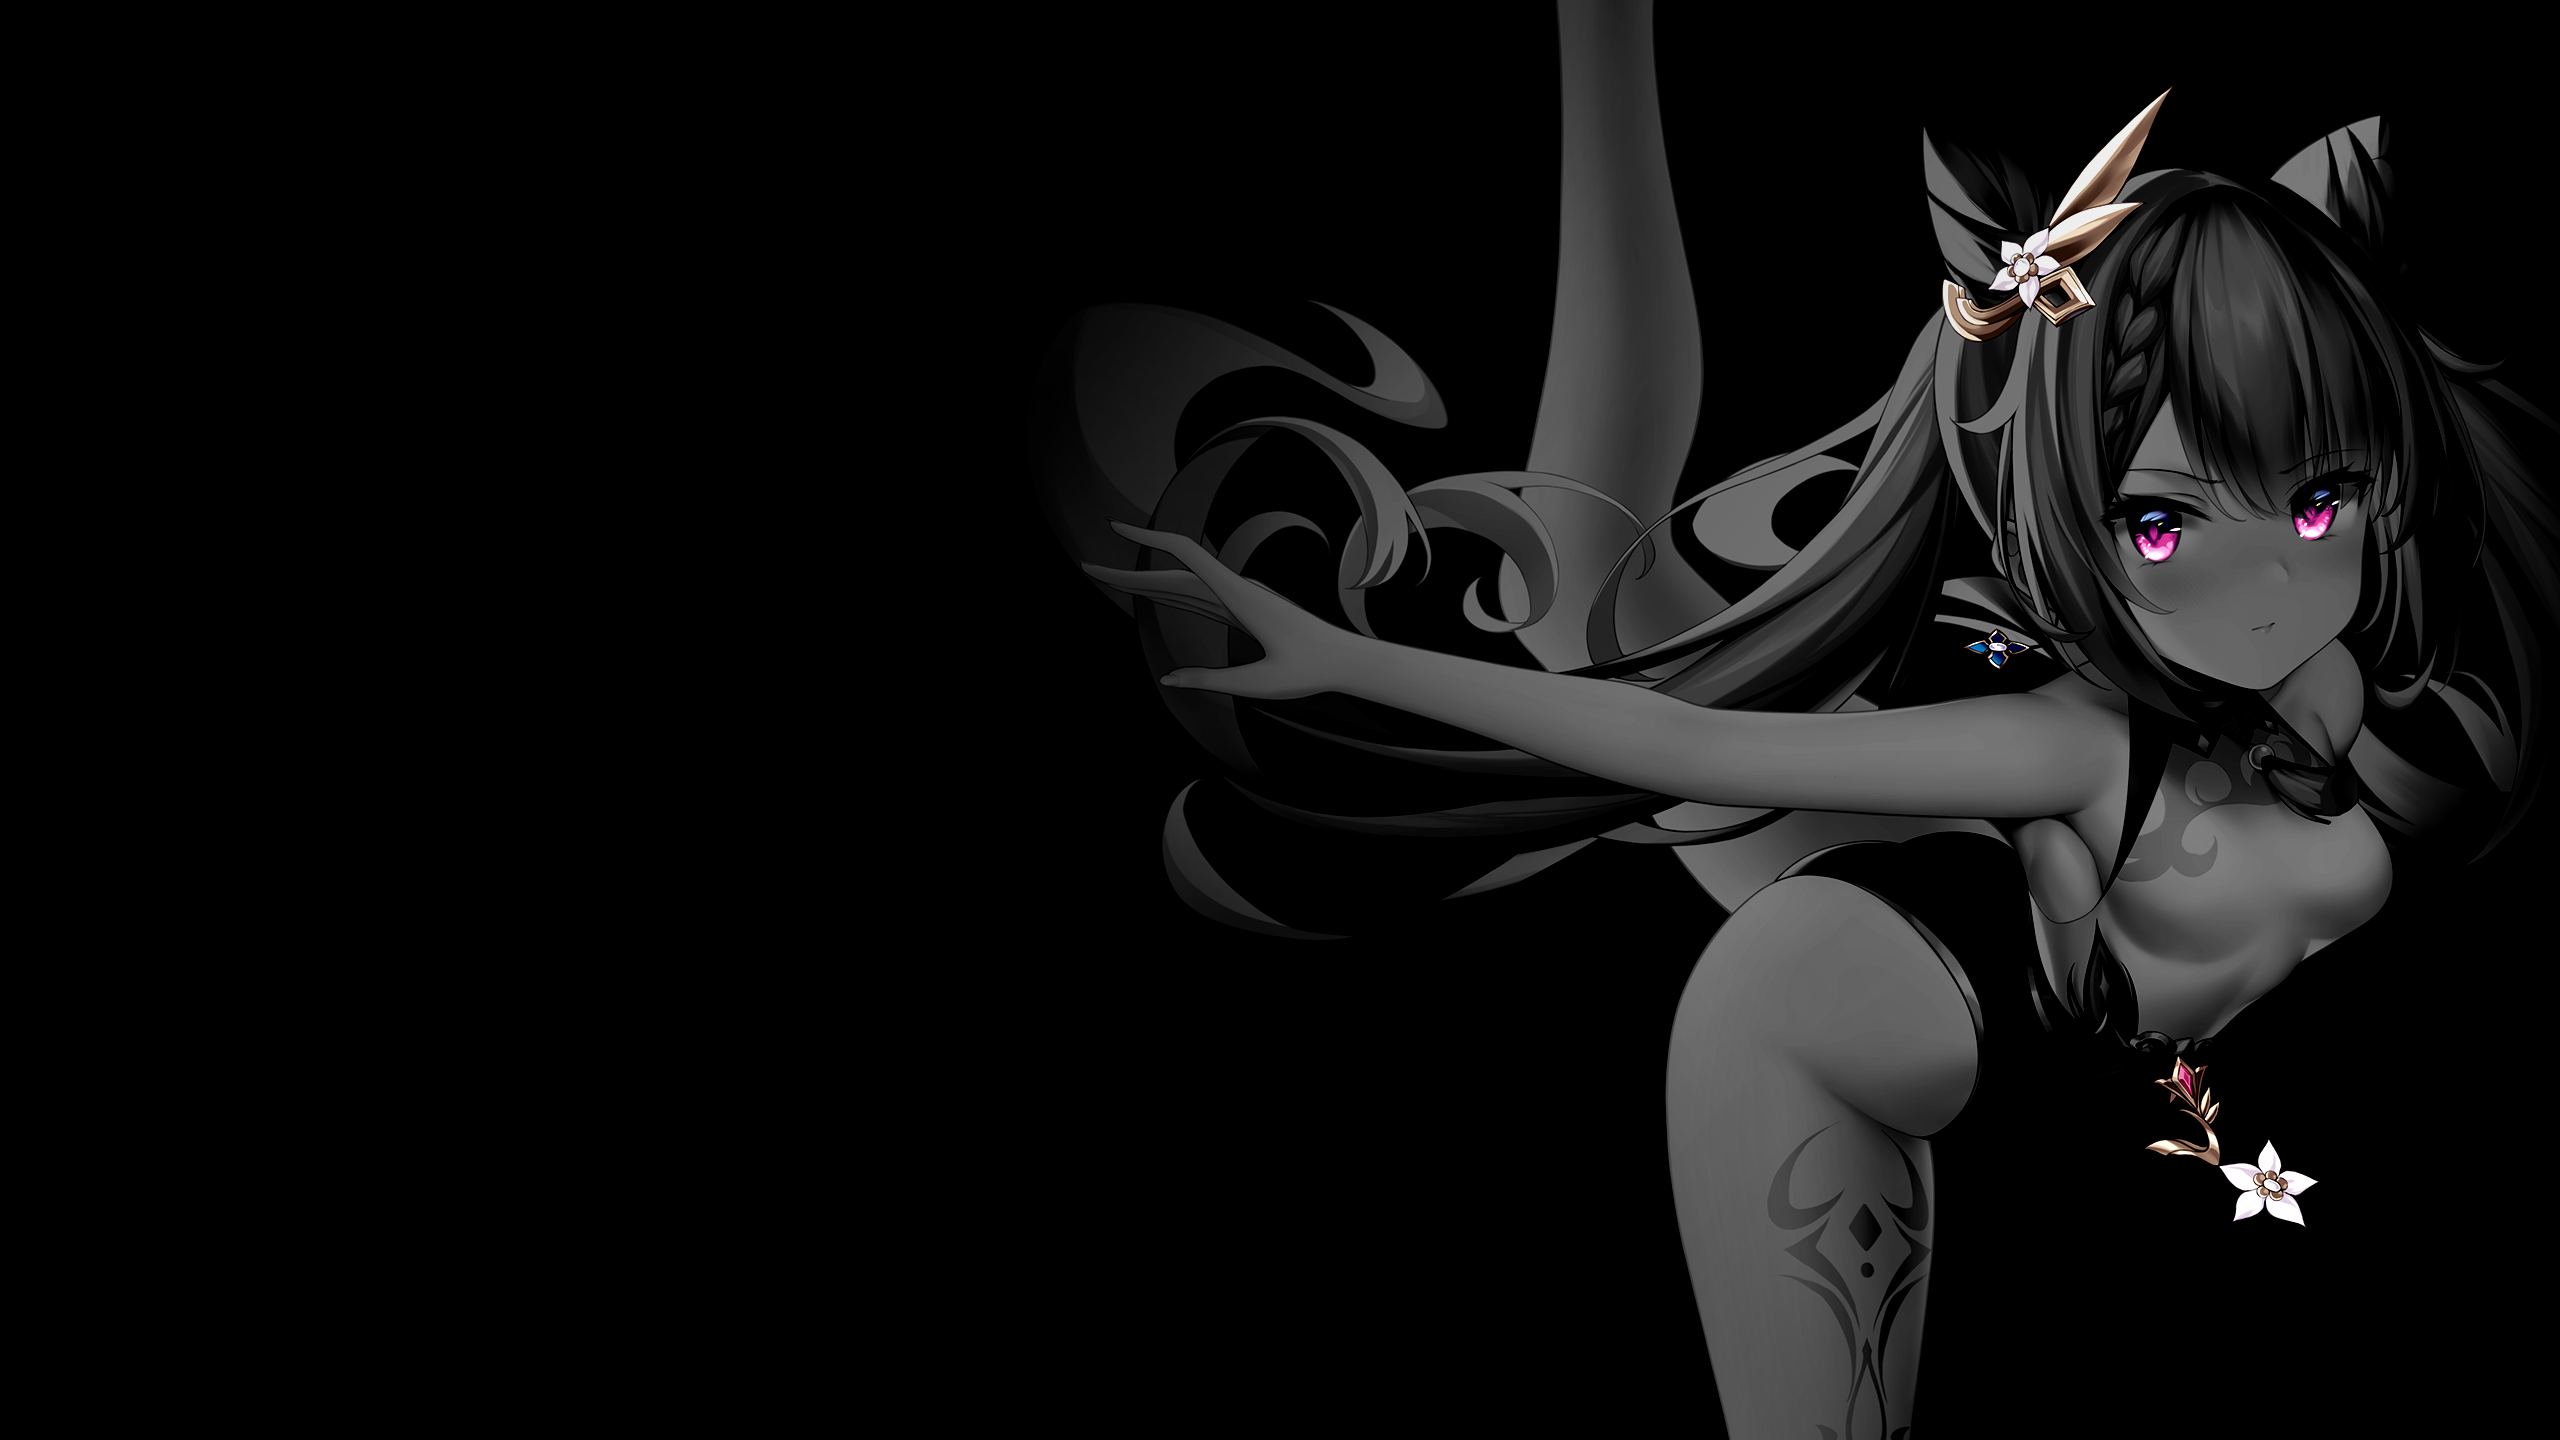 Selective Coloring Black Background Dark Background Simple Background Anime  Girls Keqing Genshin Imp Wallpaper - Resolution:2560x1440 - ID:1325683 -  